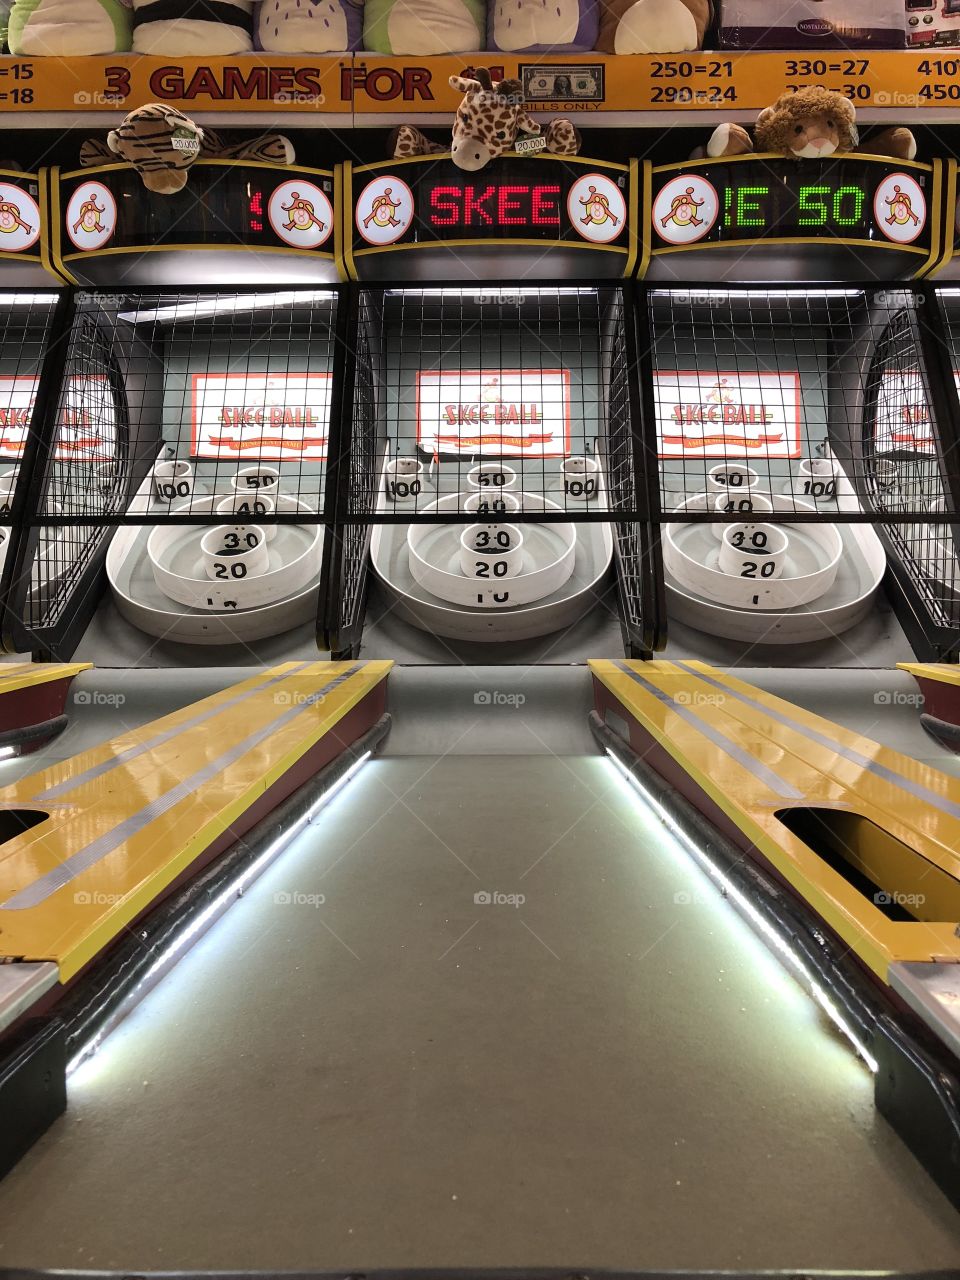 Skee-Ball game in arcade